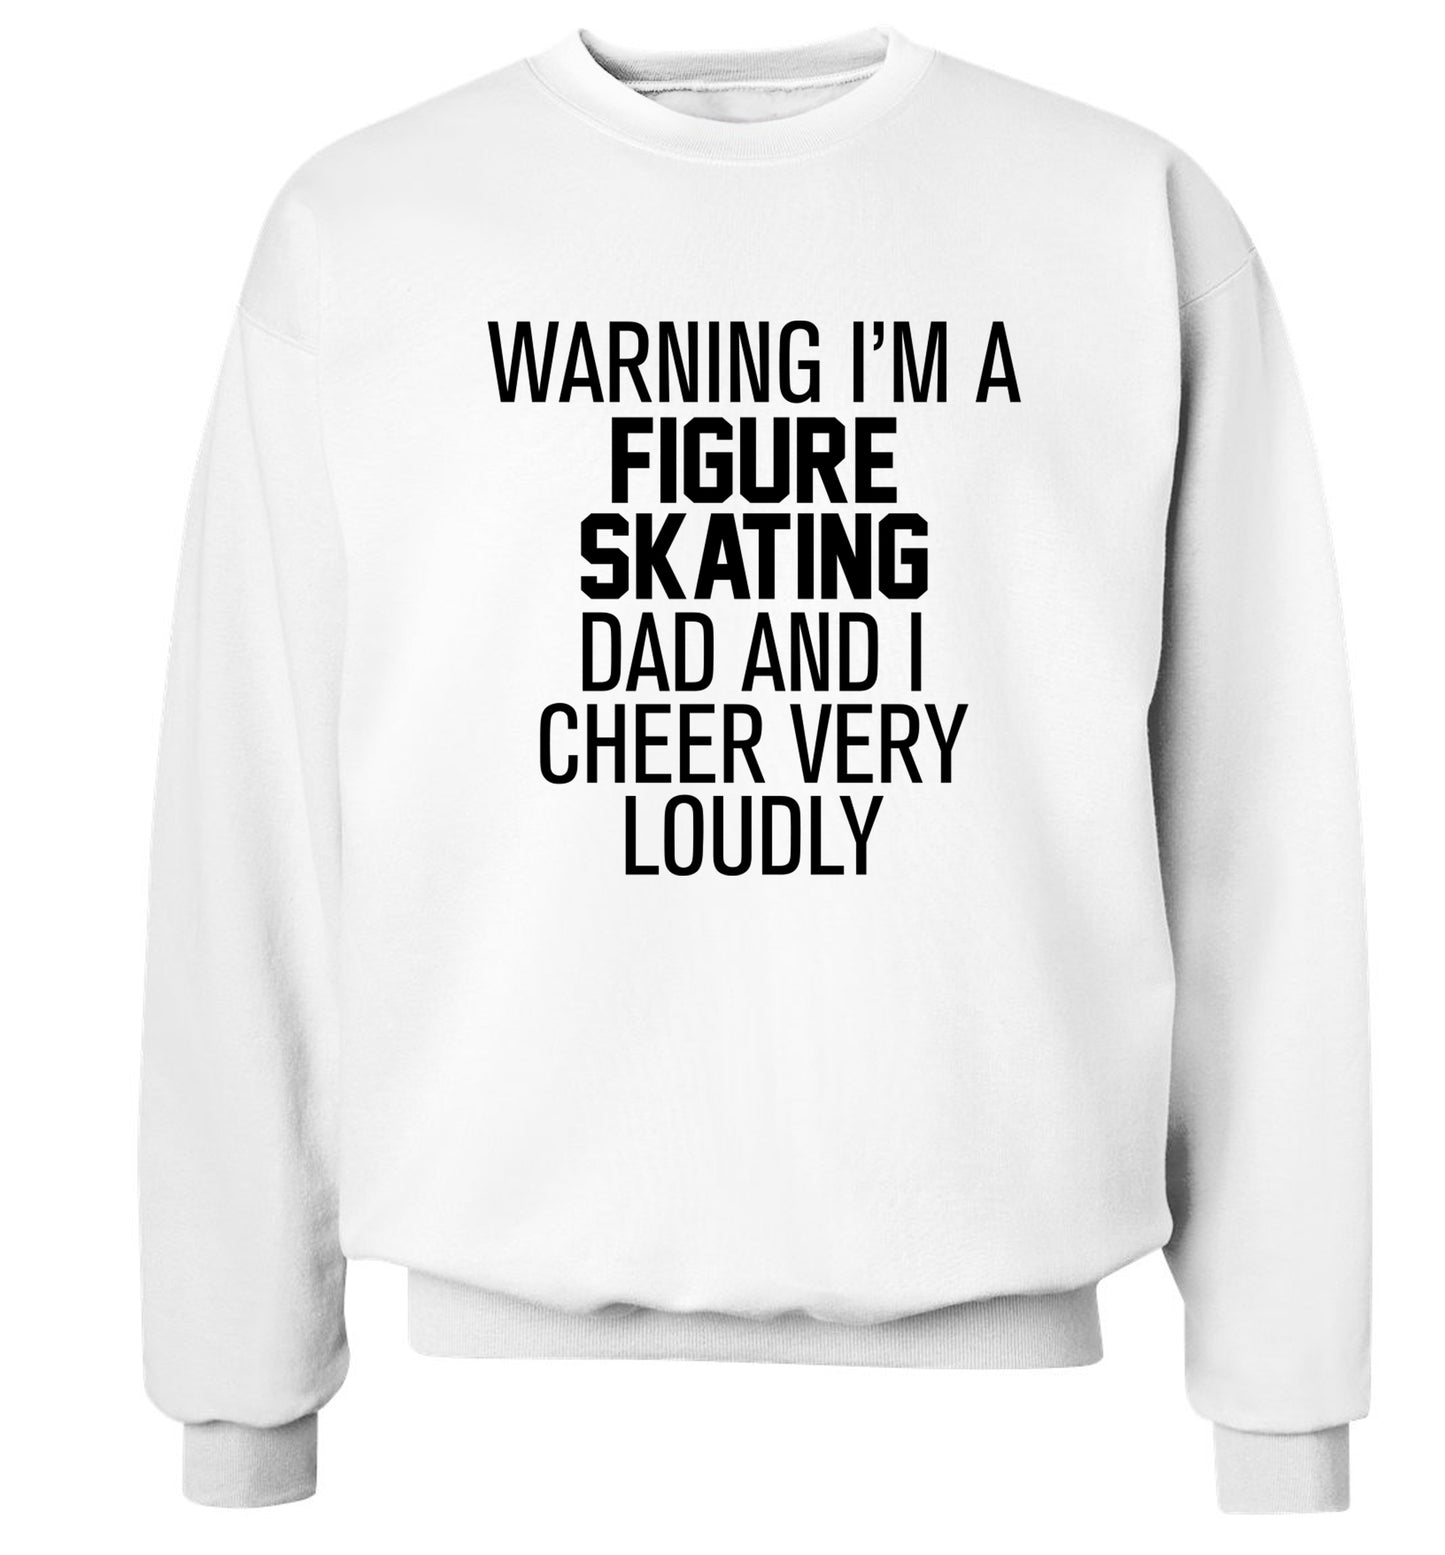 Warning I'm a figure skating dad and I cheer very loudly Adult's unisexwhite Sweater 2XL